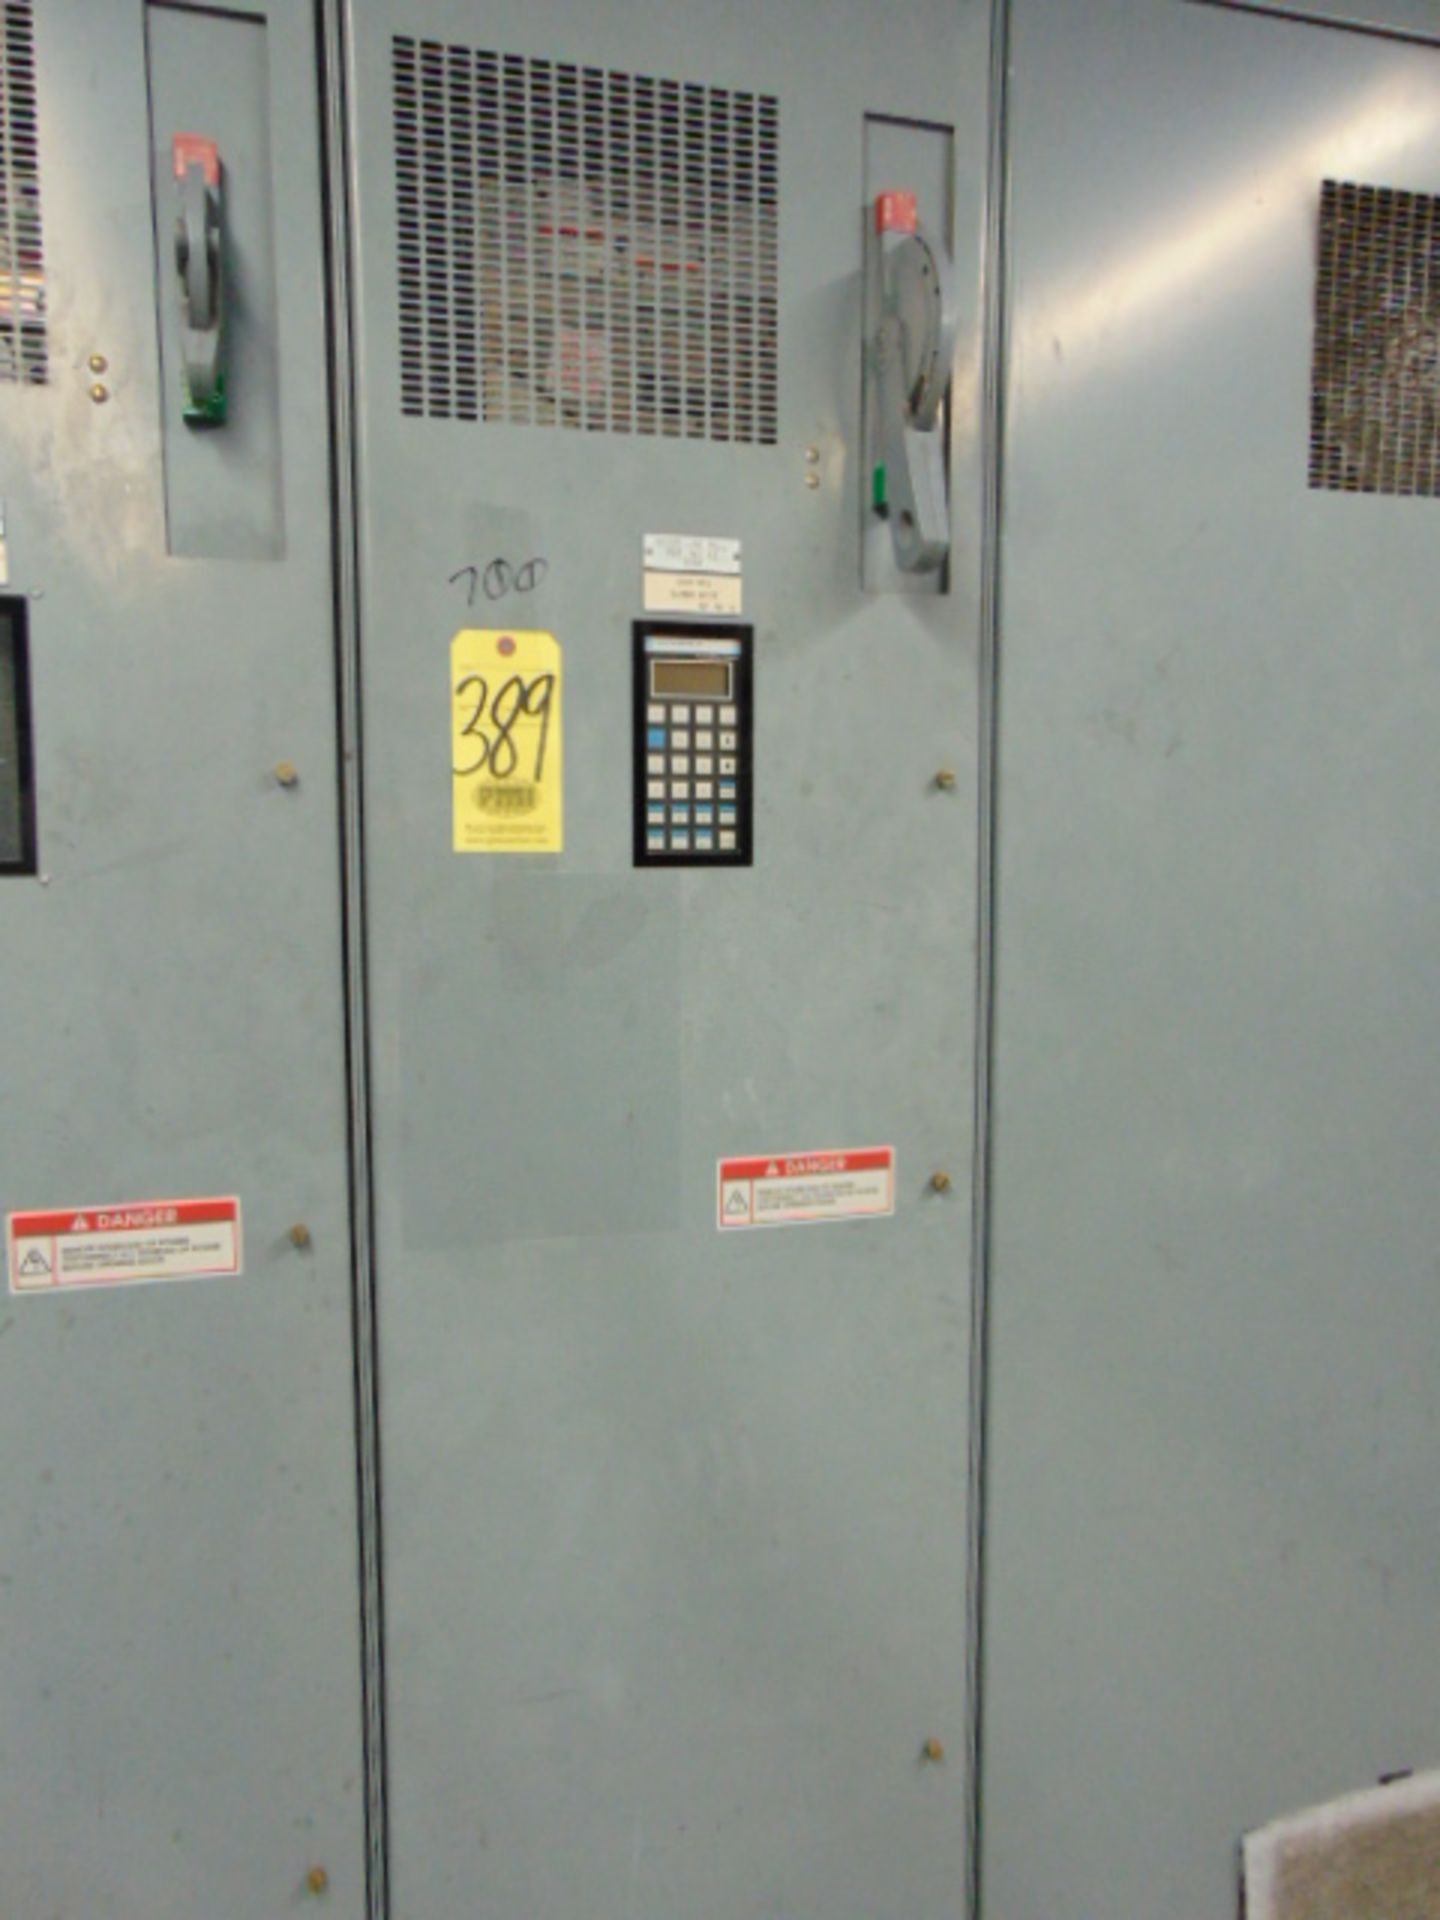 AC VARIABLE FREQUENCY DRIVE, ALLEN BRADLEY POWERFLEX MDL. 700 (Note: has been disconnected by